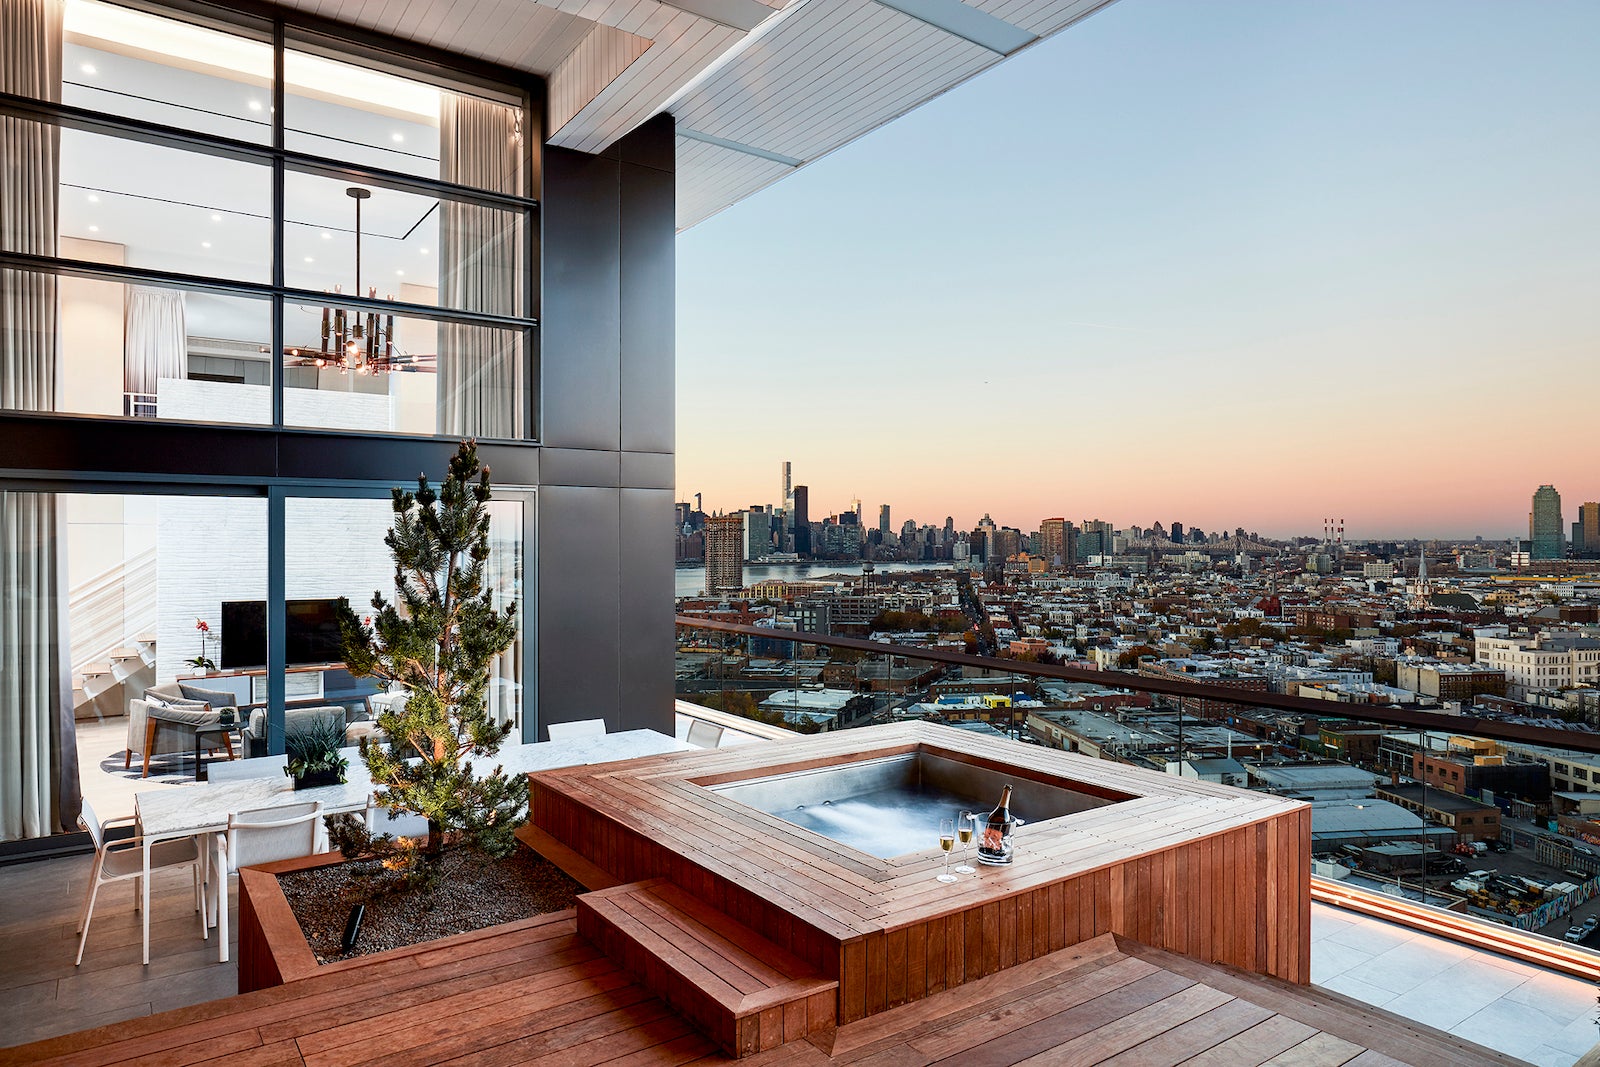 private hot tub overlooking NYC skyline